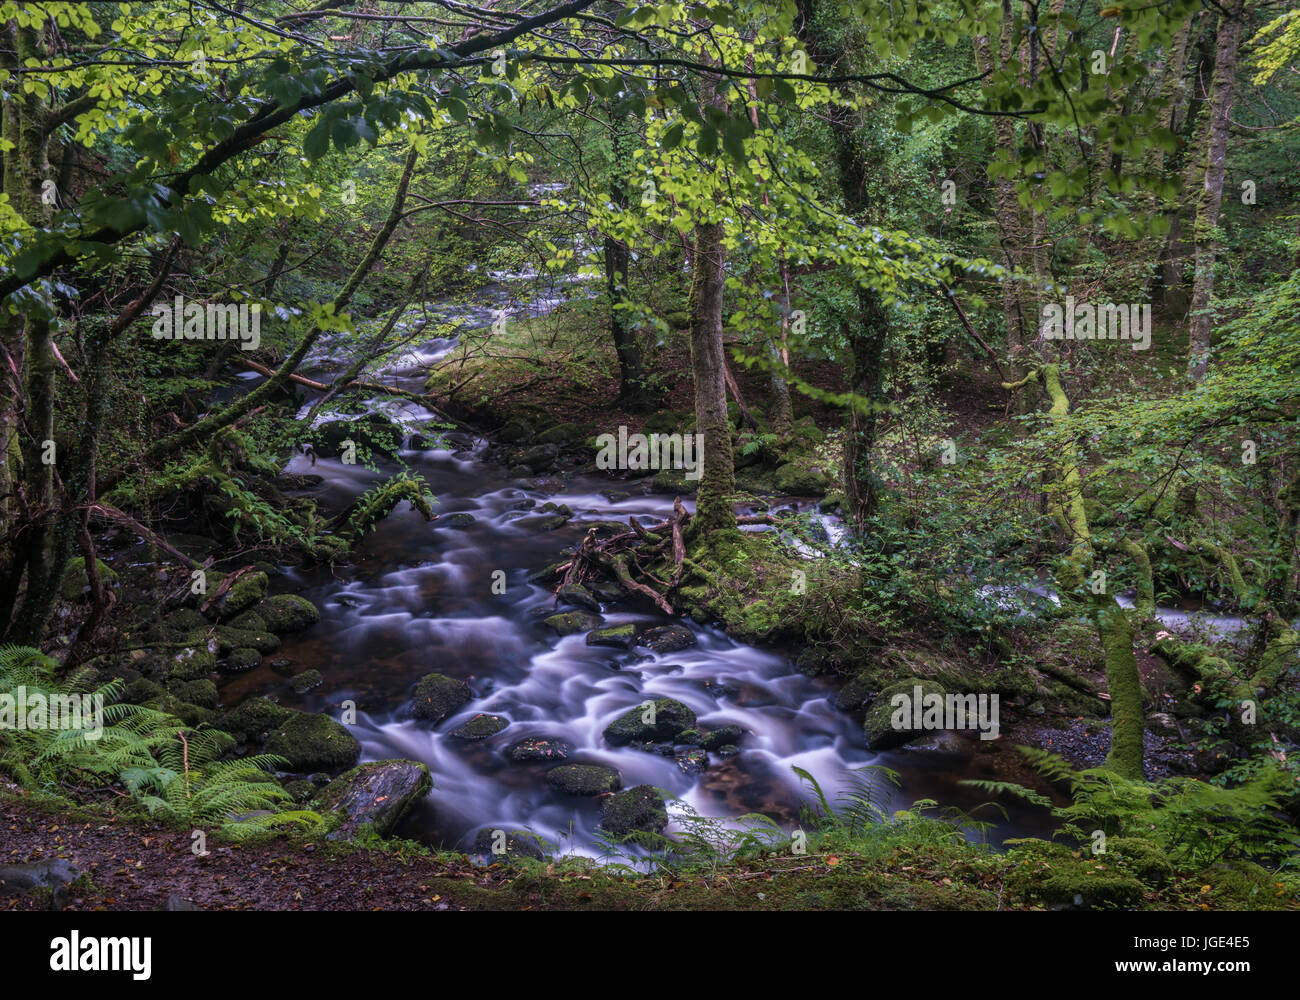 Fast flowing stream in an ancient wood with mossy trees Stock Photo